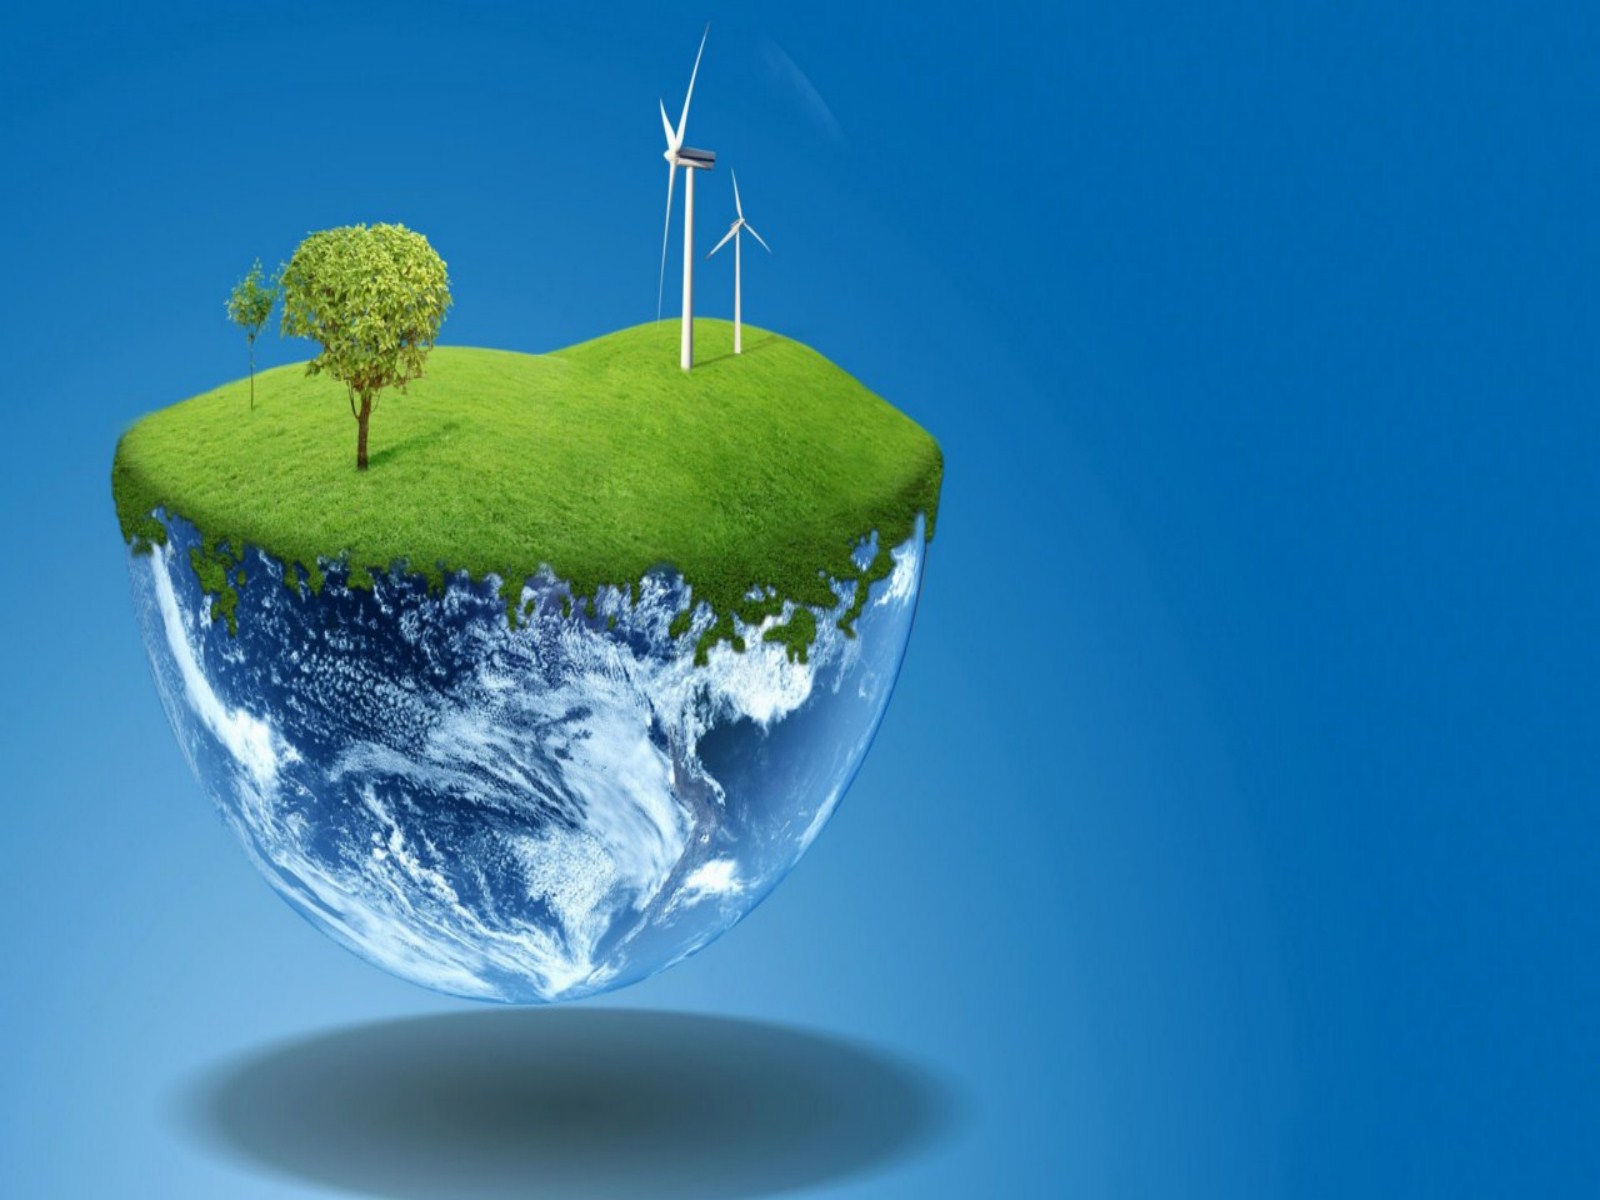 PicturesPool: EarthDay 2013 Wallpapers | EarthDay Pictures